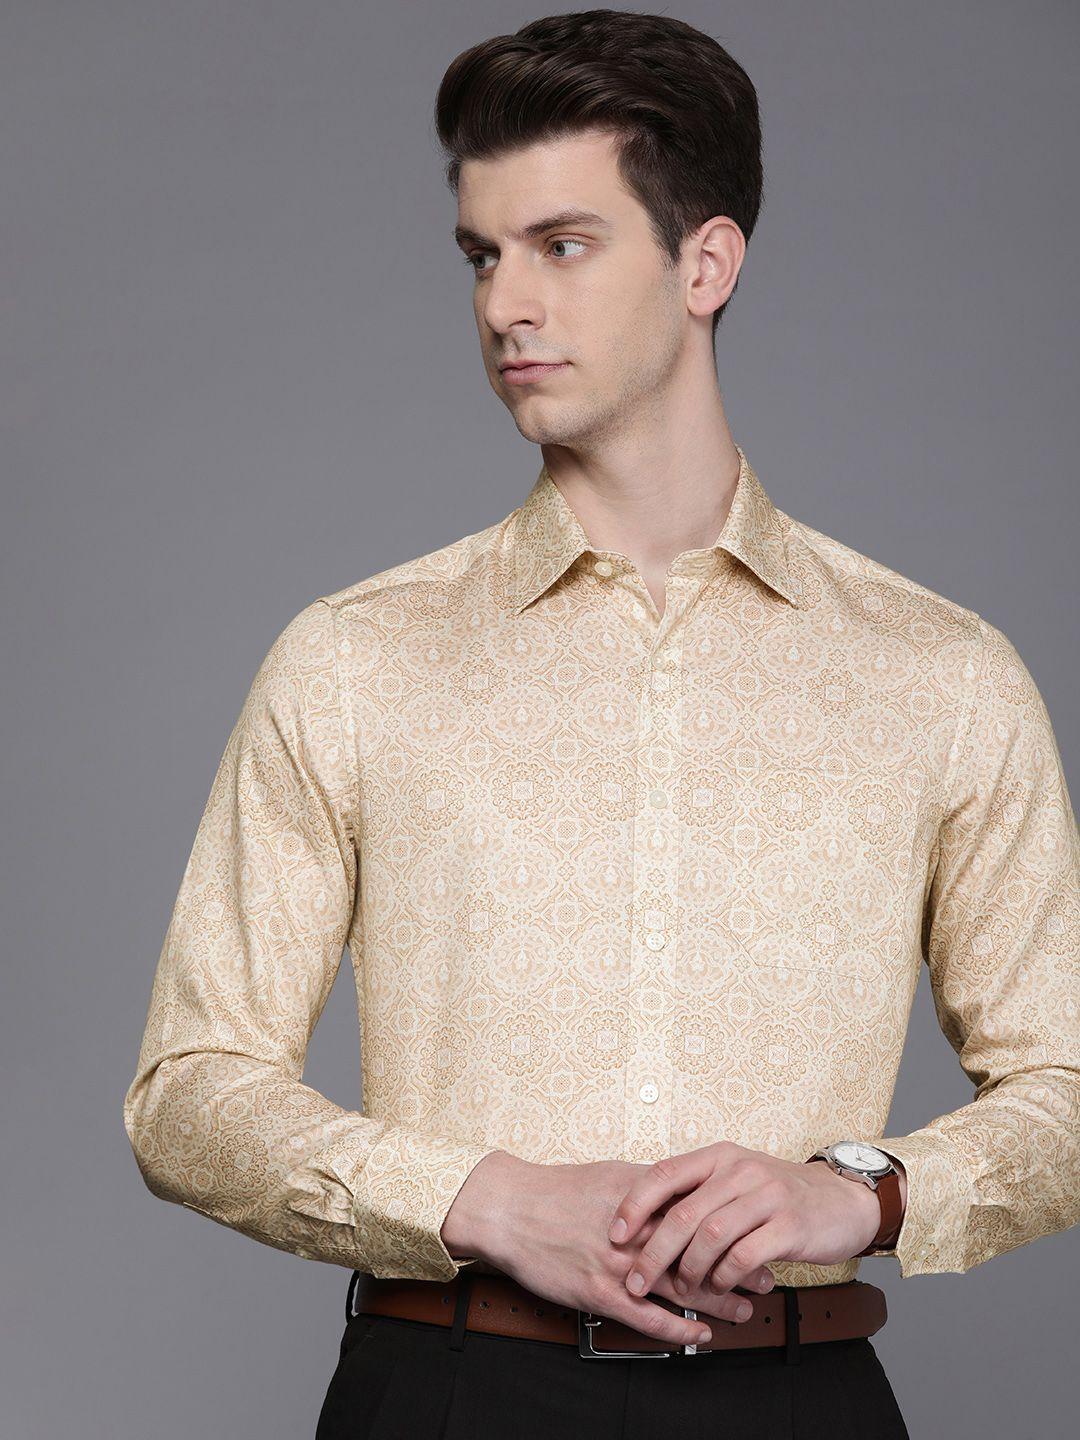 louis philippe classic ethnic motifs printed pure cotton formal shirt